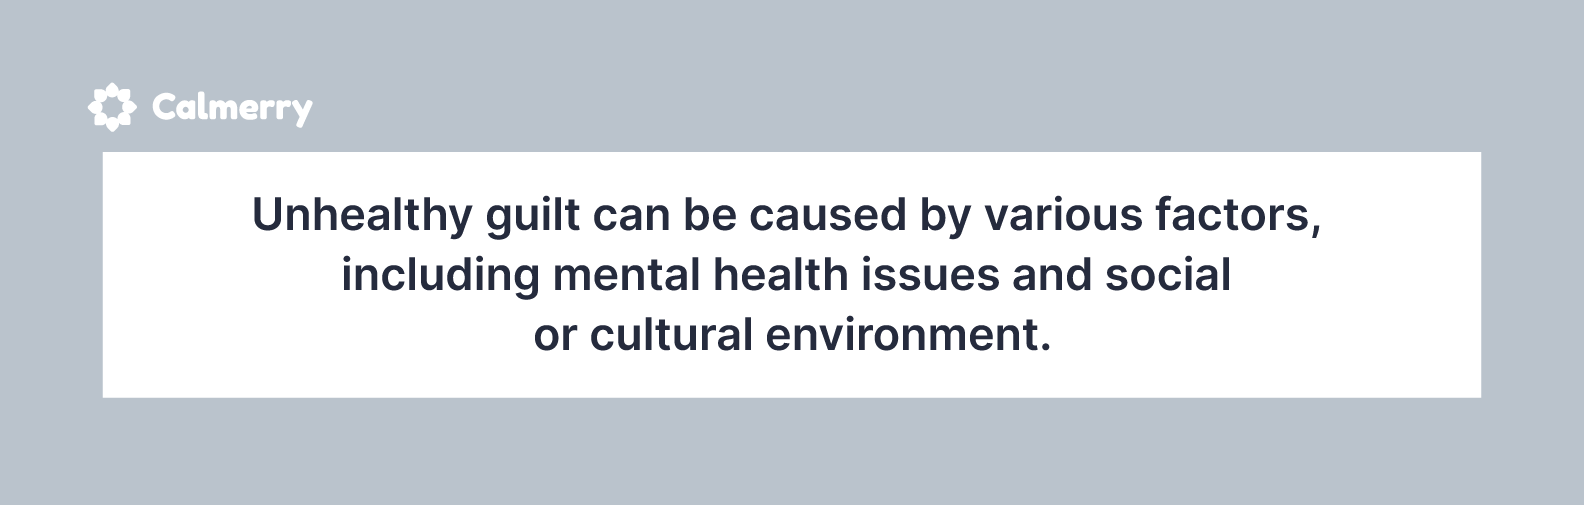 Unhealthy guilt can be rooted in culture and mental health